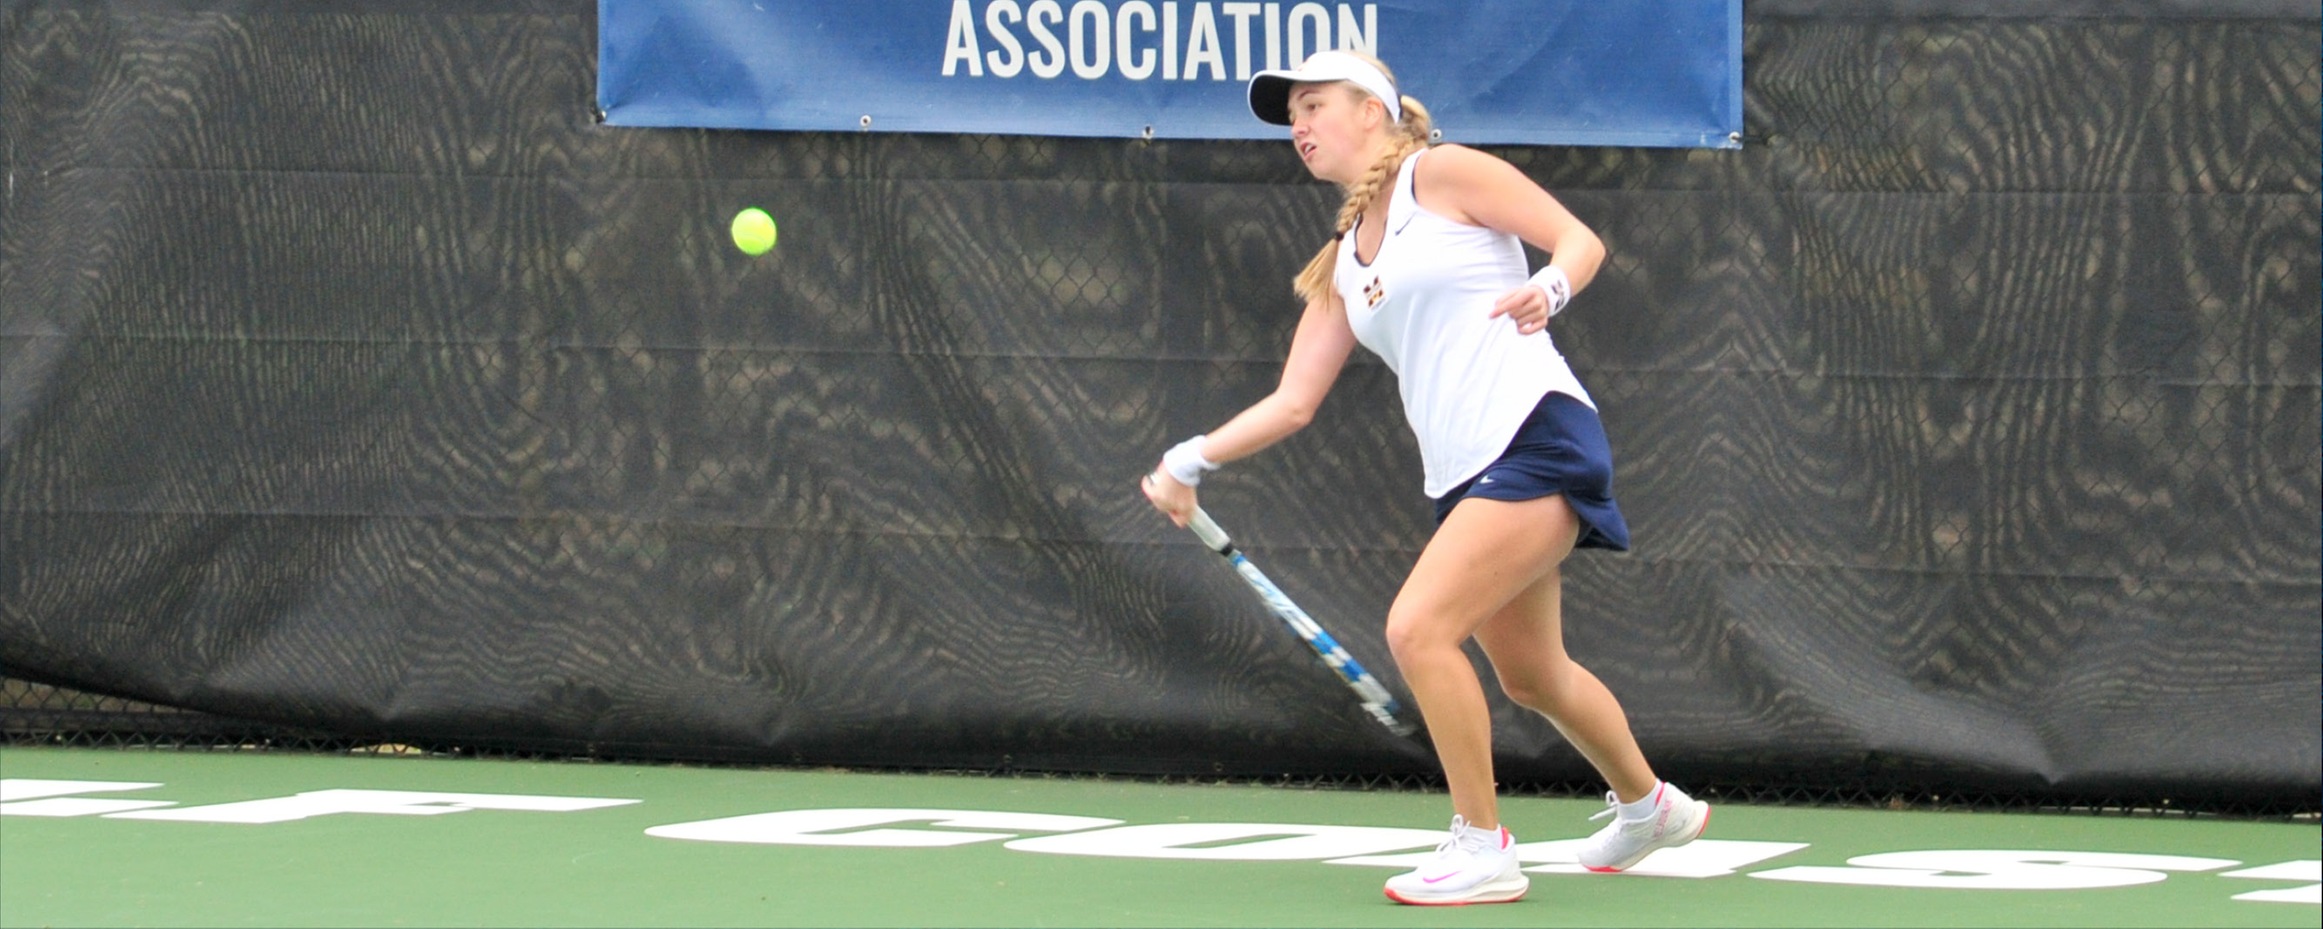 Lopareva leads duo to national tournament